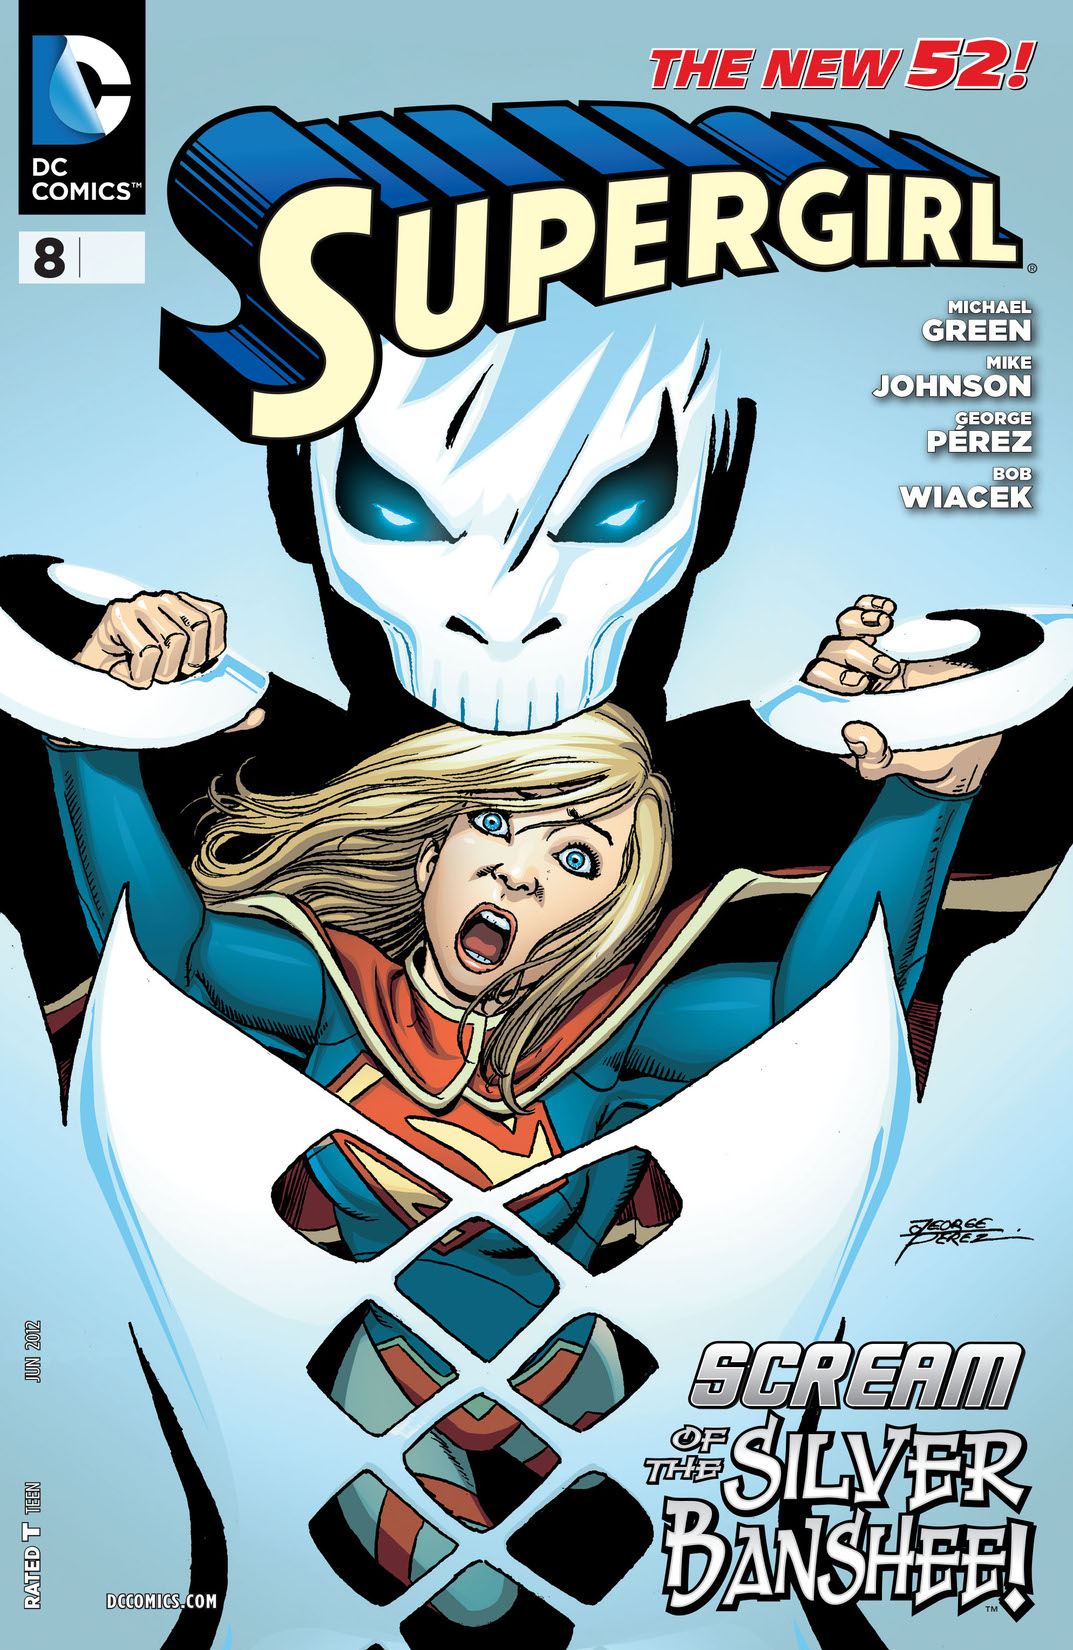 Supergirl (2011-) #8 preview images